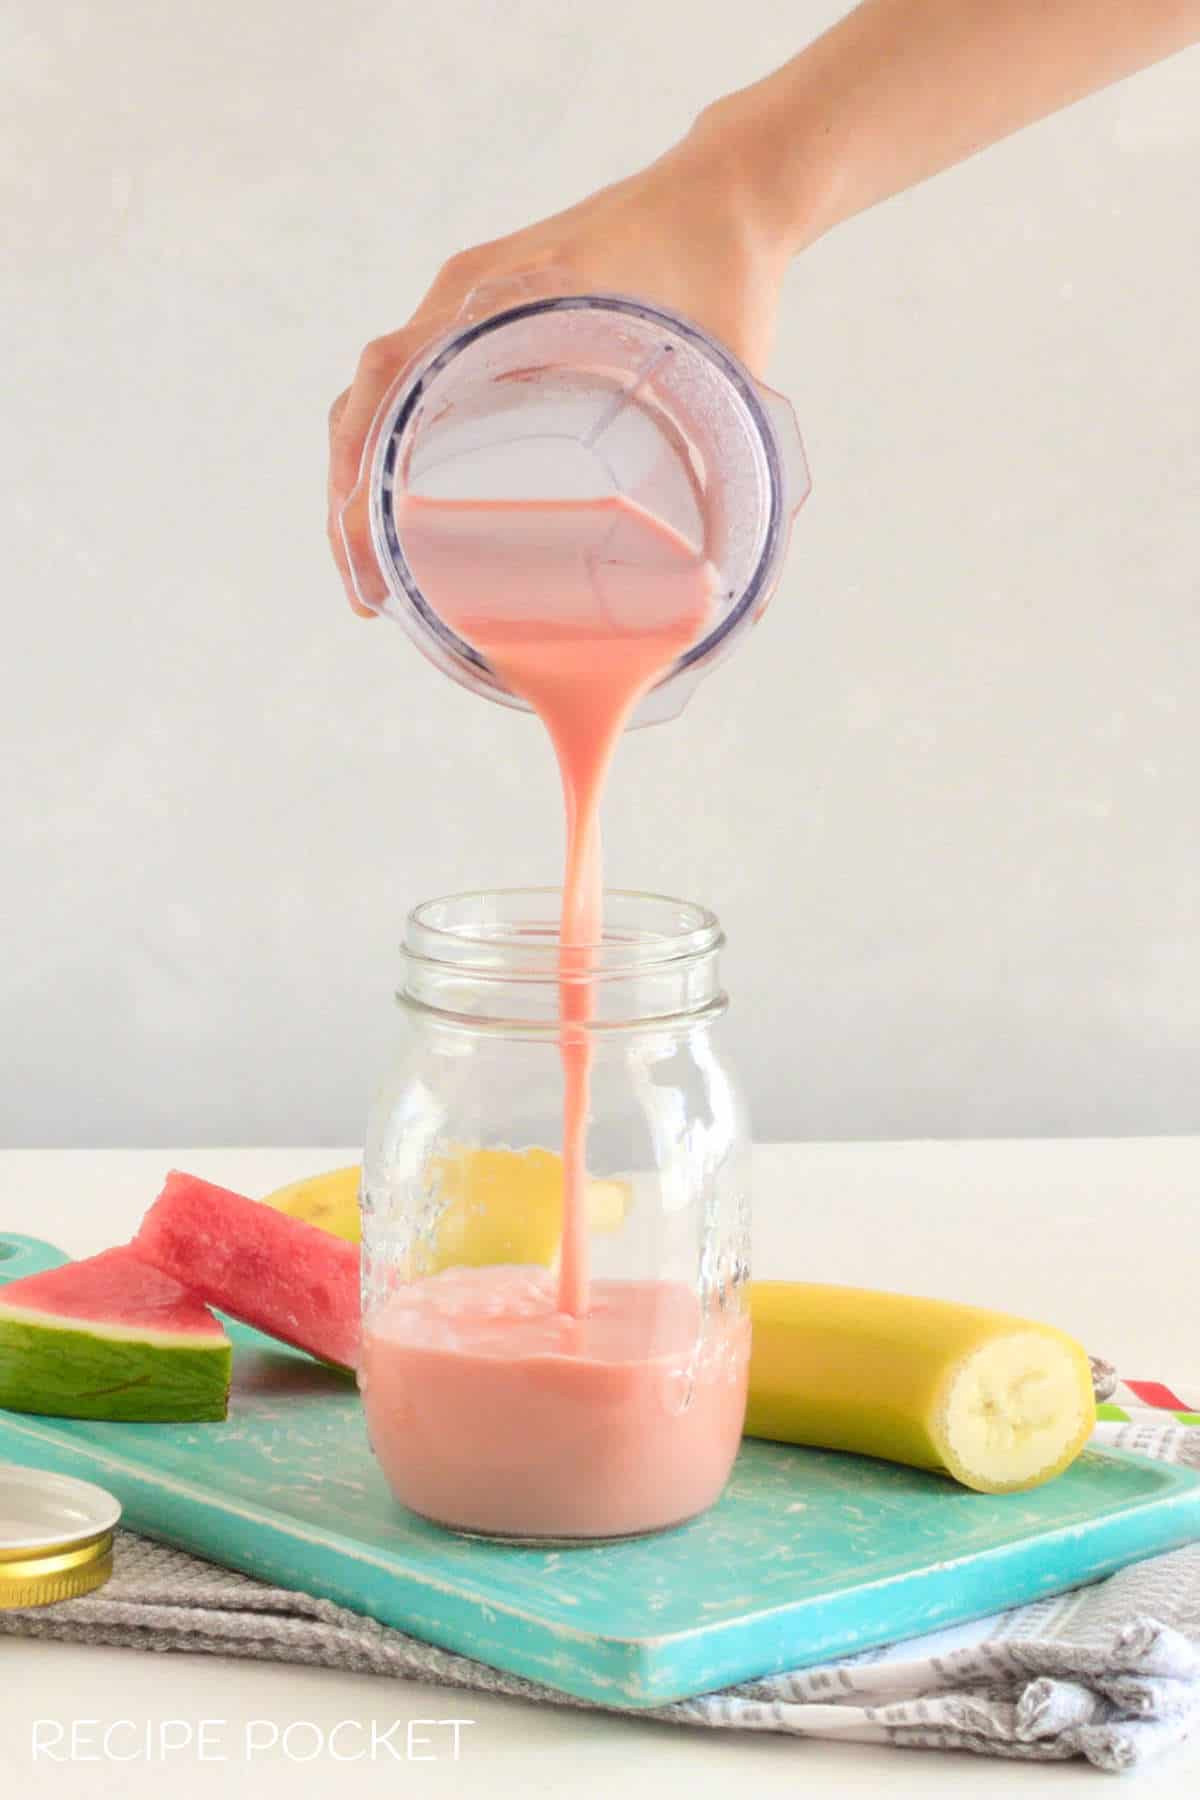 Blended smoothie being poured into a glass.